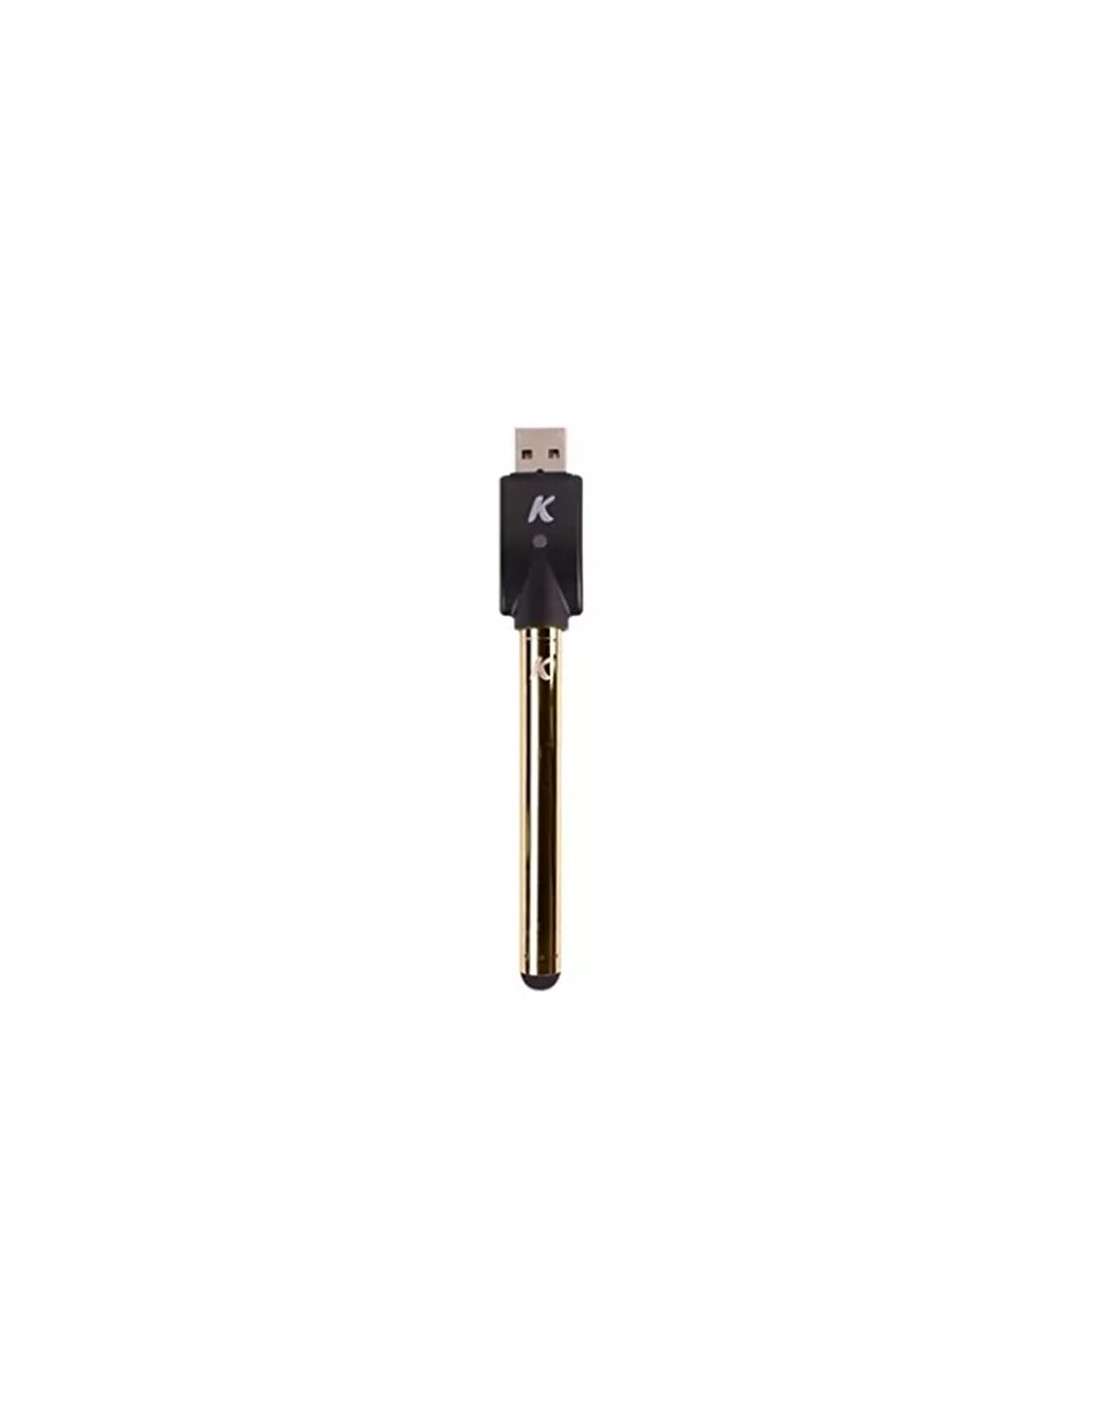 KandyPens Slim Battery Auto-Draw w/USB Charger Gold 1pcs:0 US